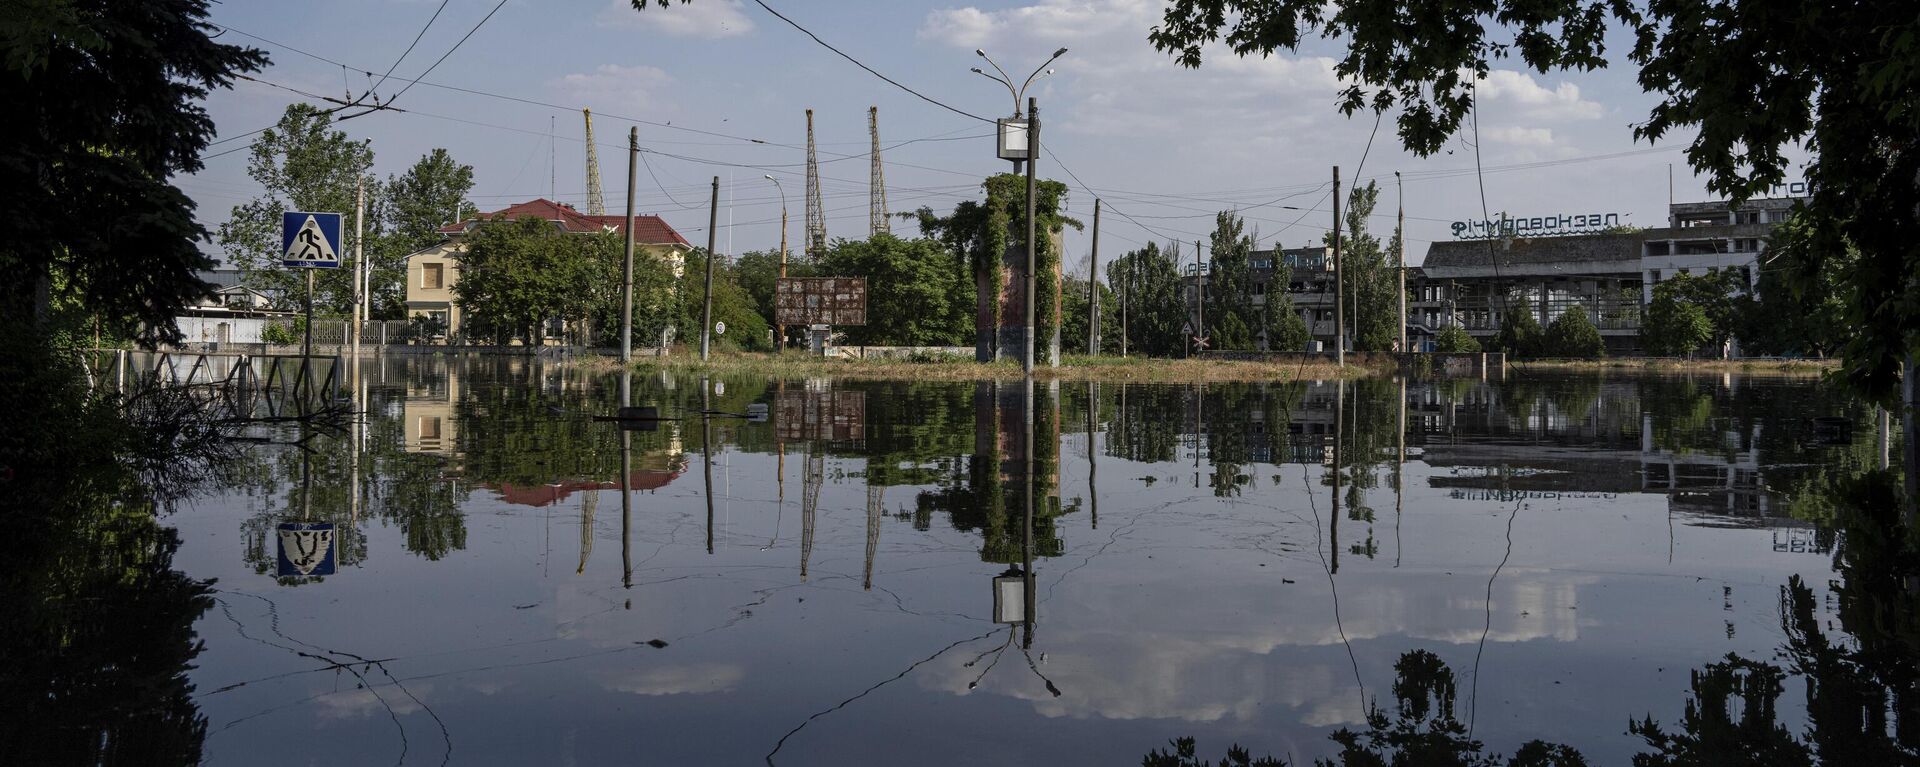 Streets are flooded in Kherson, Tuesday, Jun 6, 2023 after the Kakhovka dam was blown up overnight. The wall of the dam has collapsed, triggering floods, endangering Europe's largest nuclear power plant and threatening drinking water supplies. - Sputnik India, 1920, 06.06.2023